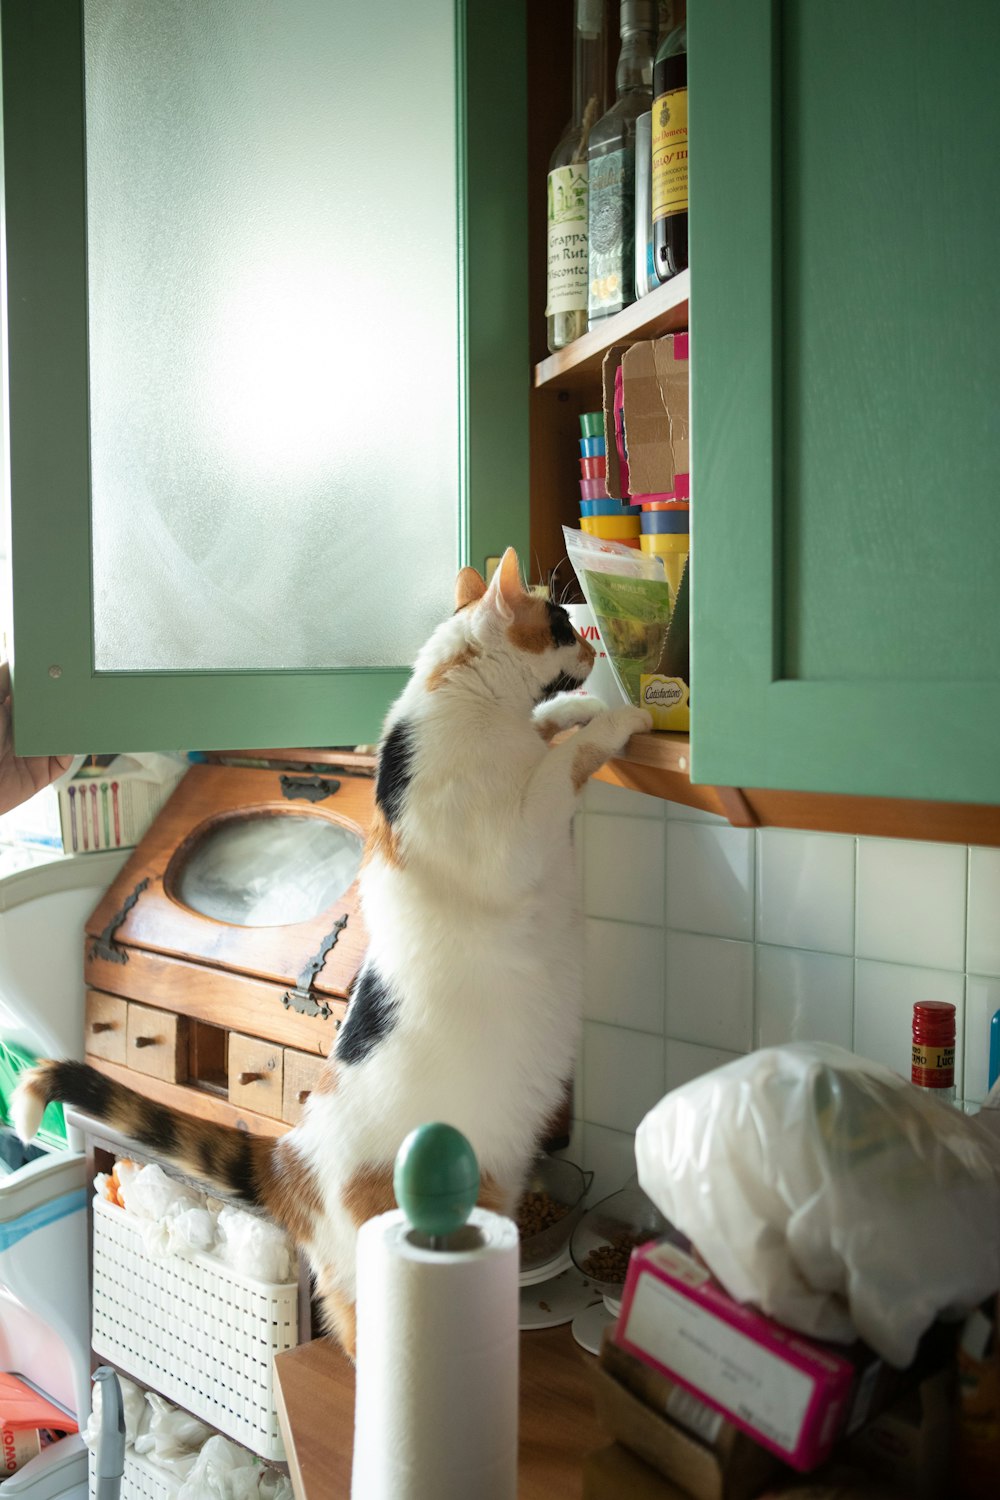 a cat standing on its hind legs in a kitchen